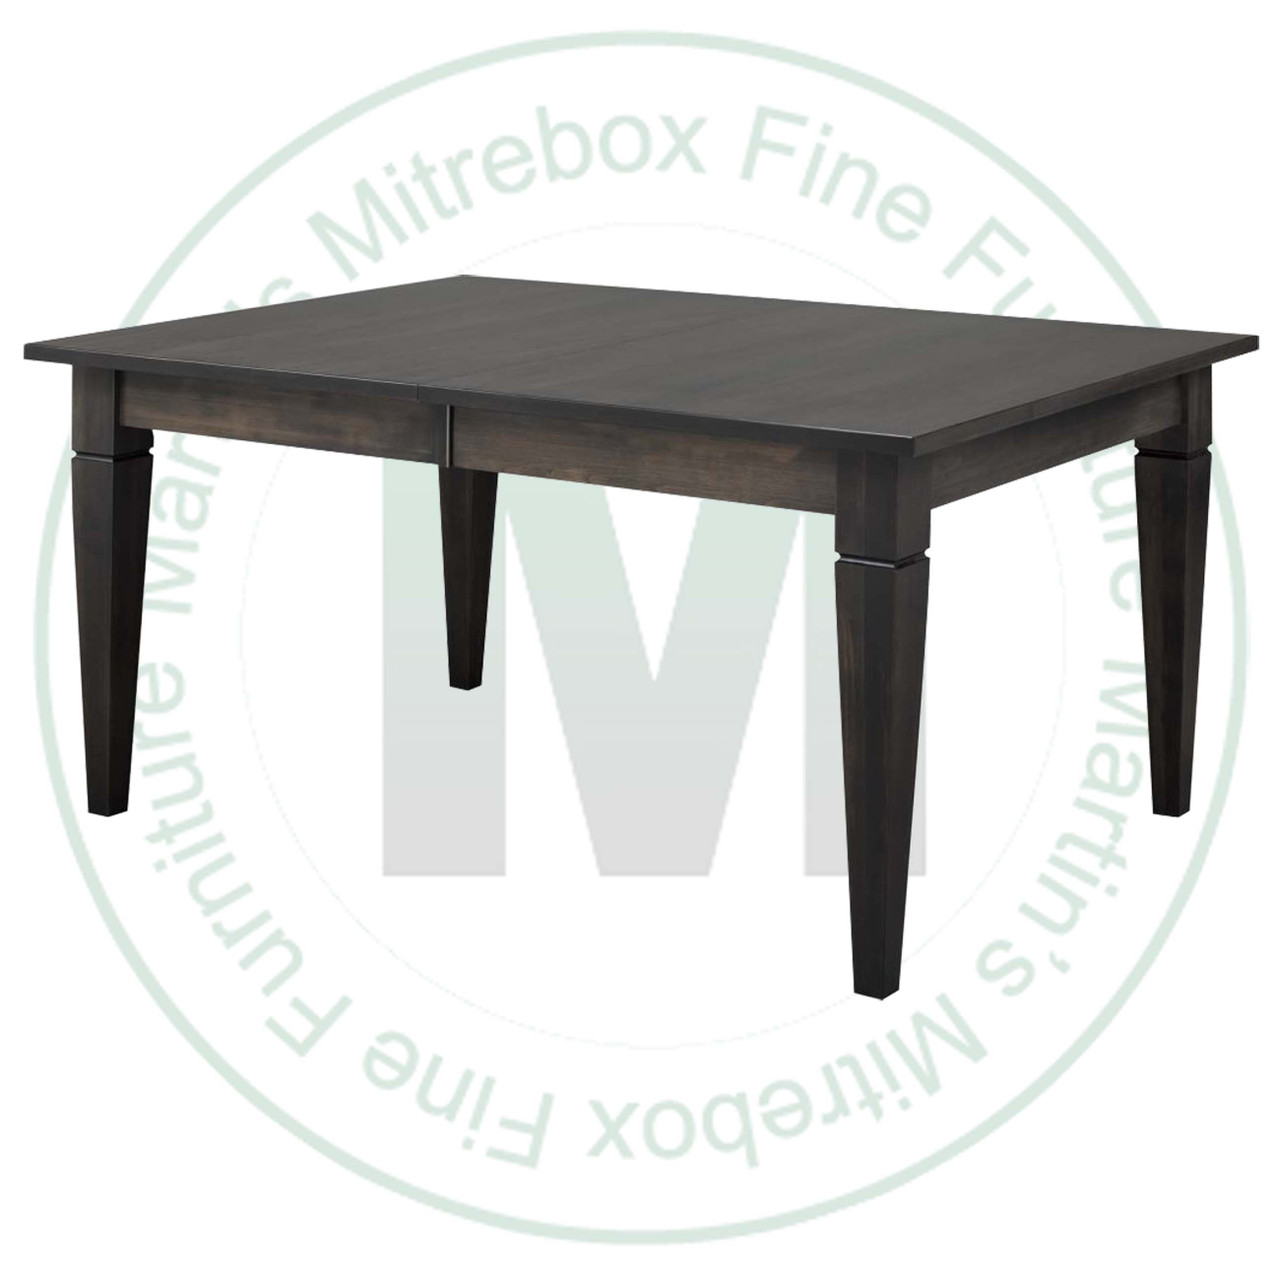 Maple Reesor Solid Top Harvest Table 36''D x 72''W x 30''H Table Has 1 3/4'' Thick Top And 2 - 16'' Extensions